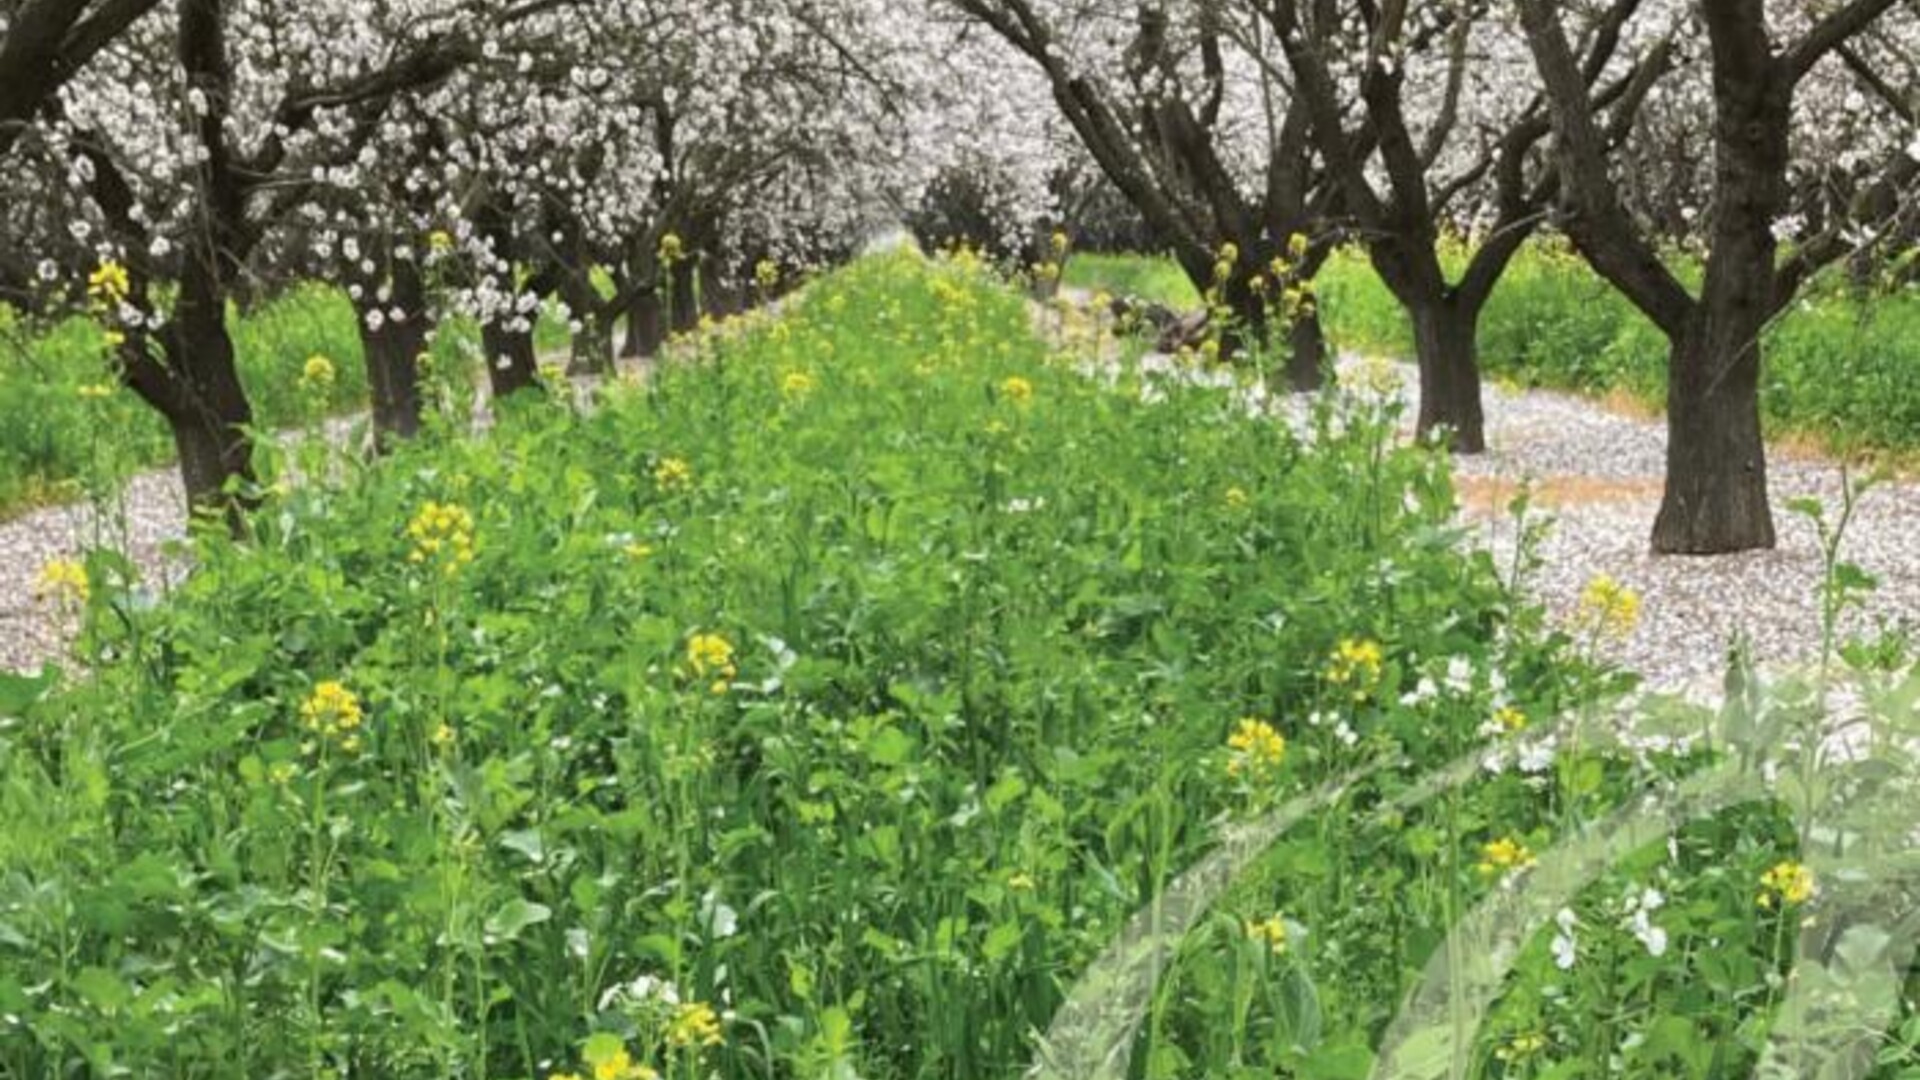 Terminating Cover Crop Options in Tree Nut Orchards